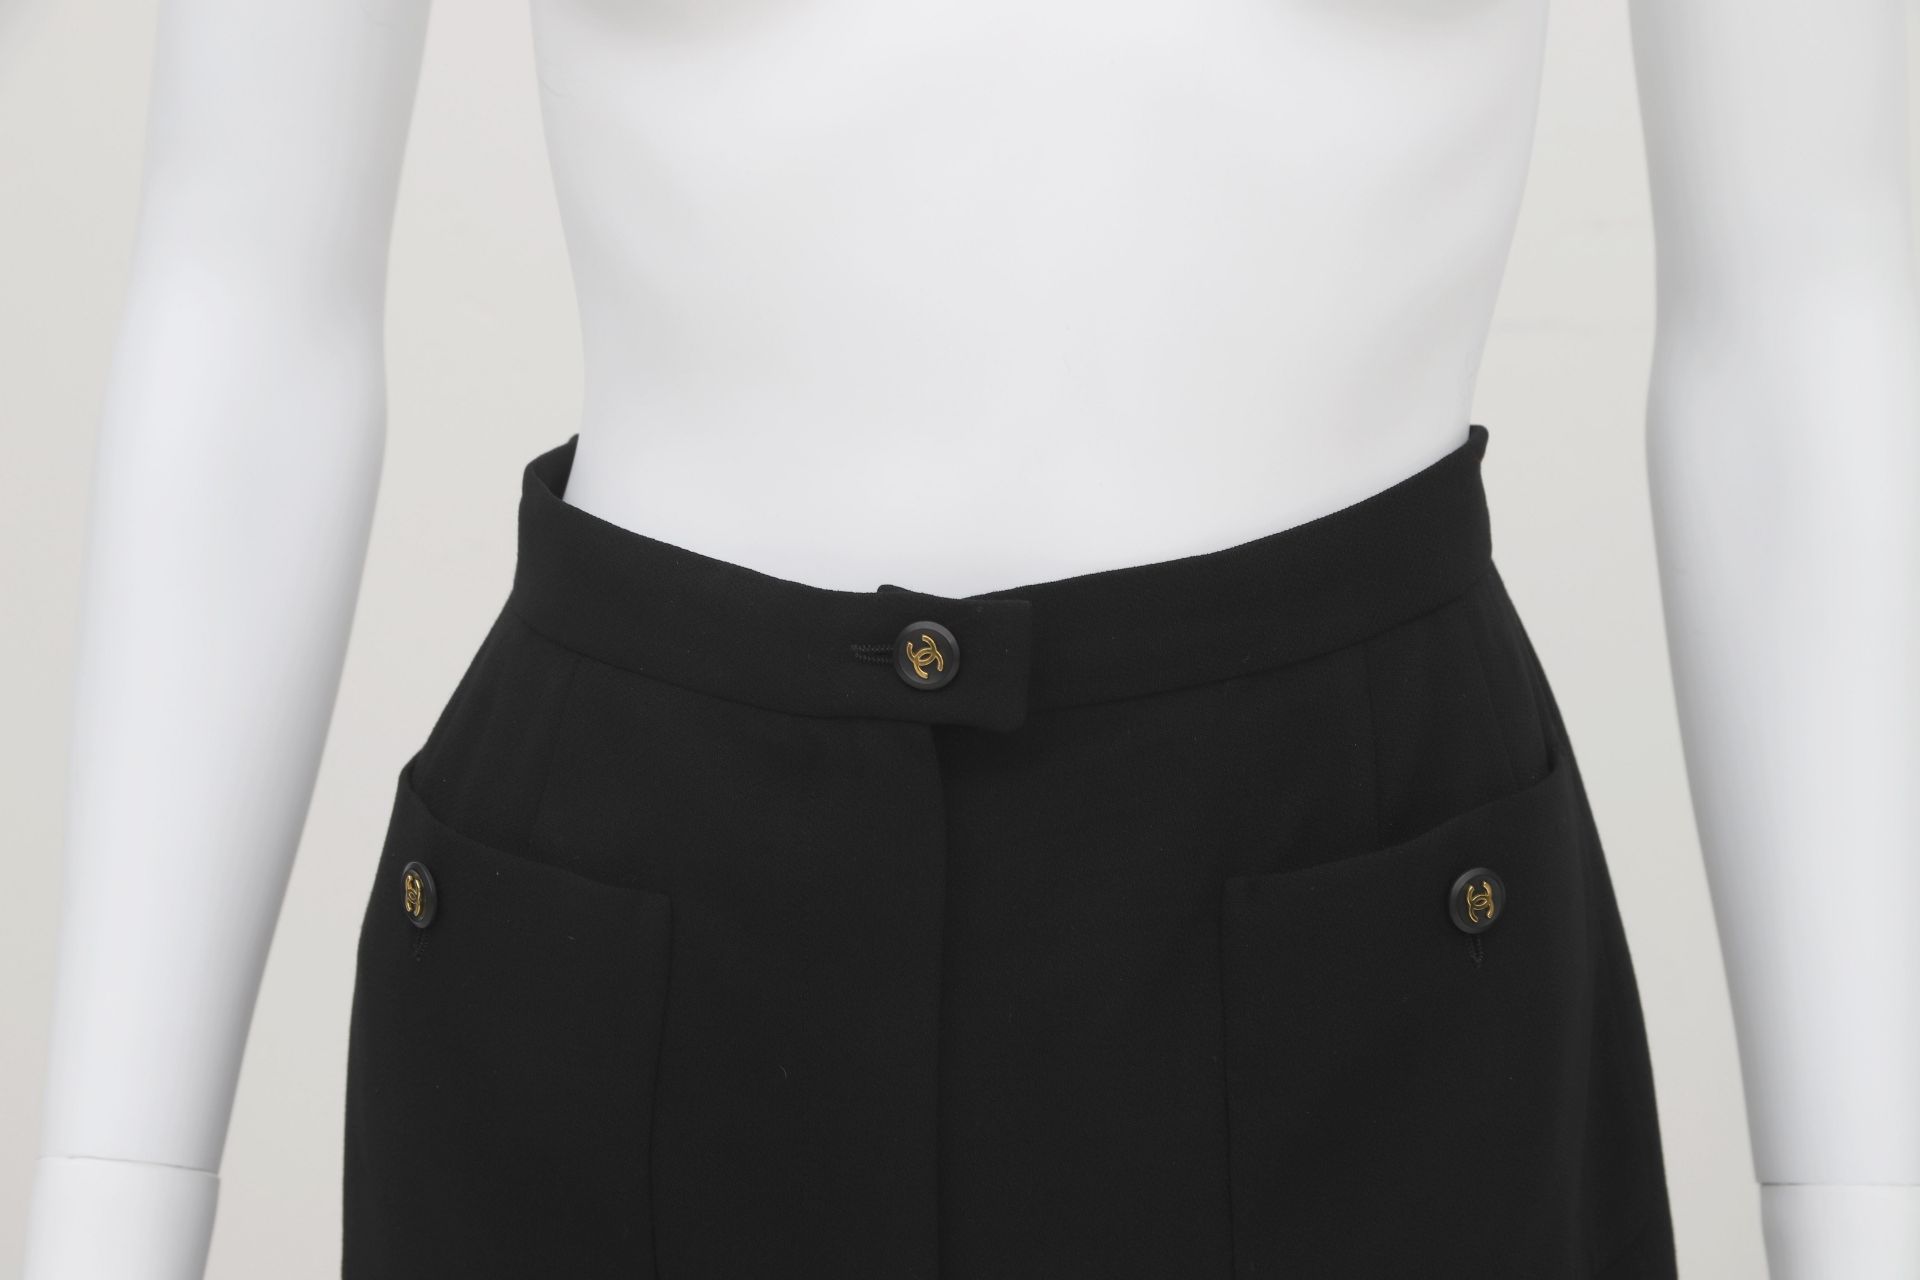 Chanel Boutique black trousers with CC logo buttons. The trousers have two pockets on the front. - Bild 6 aus 6